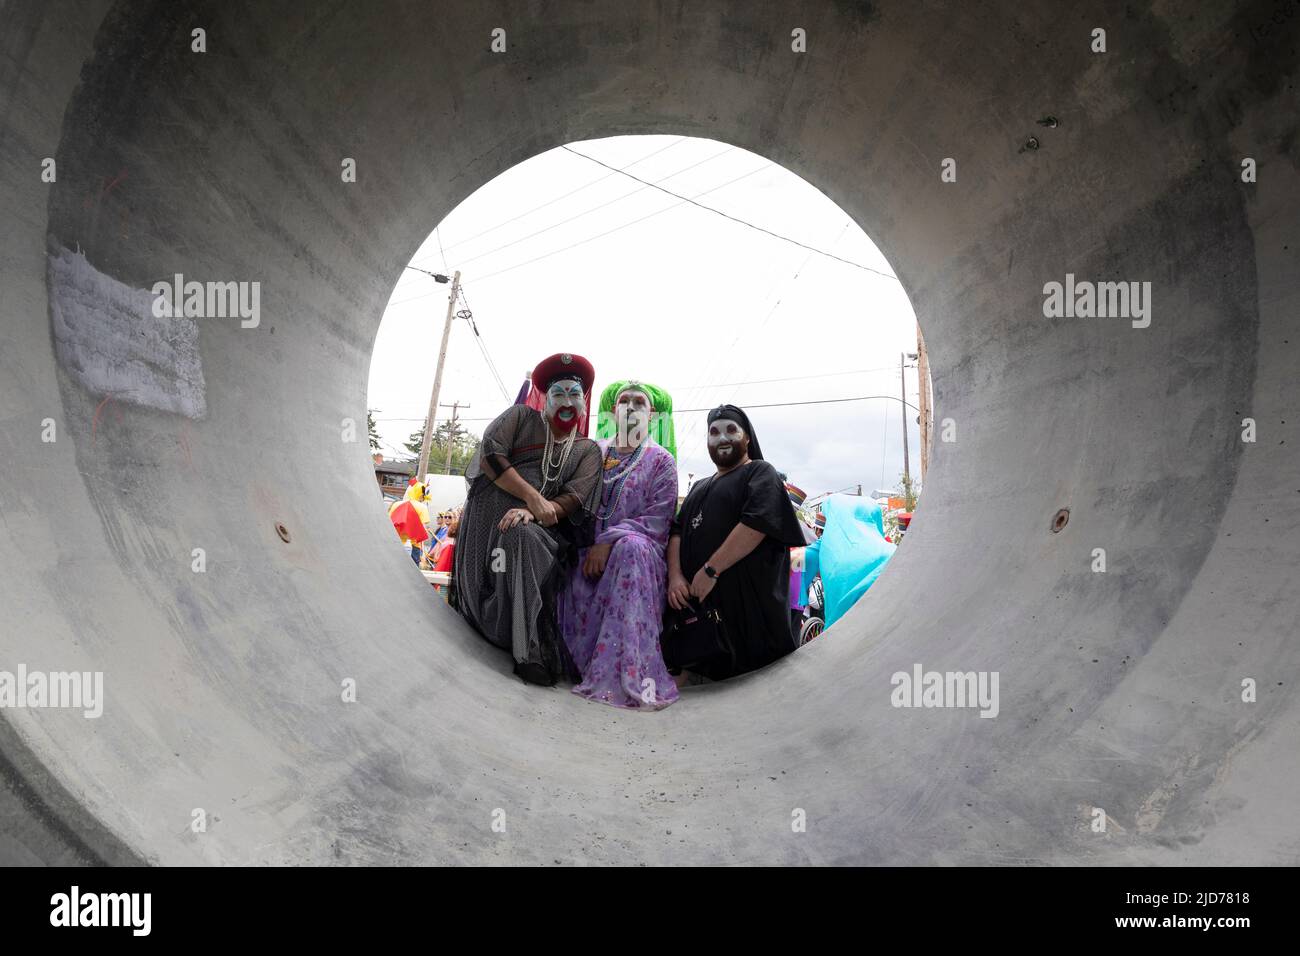 Seattle, Washington, USA. 18th June, 2022. Members of the Sisters of Perpetual Indulgence pose for a photo in an unfinished culvert at the Fremont Solstice Parade. The iconic, annual parade returned after a three-year hiatus due to the coronavirus pandemic. Credit: Paul Christian Gordon/Alamy Live News Stock Photo